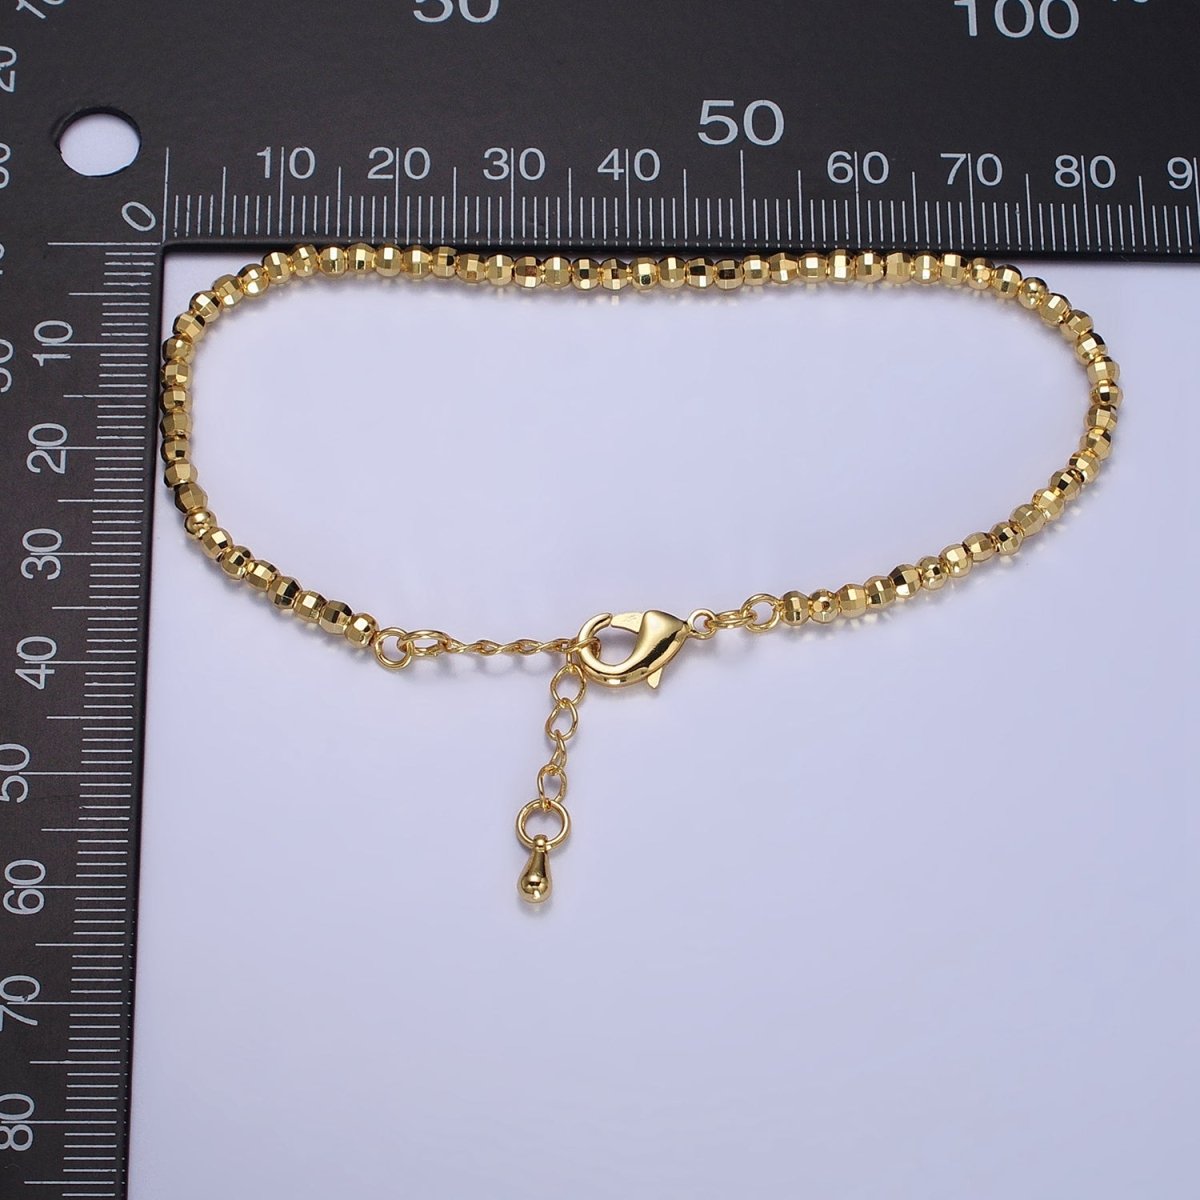 2.5mm, 3.5mm Gold, Silver Multifaceted Disco Ball Round Bead 7 Inch Chain Bracelet | WA-1572 - WA-1575 Clearance Pricing - DLUXCA